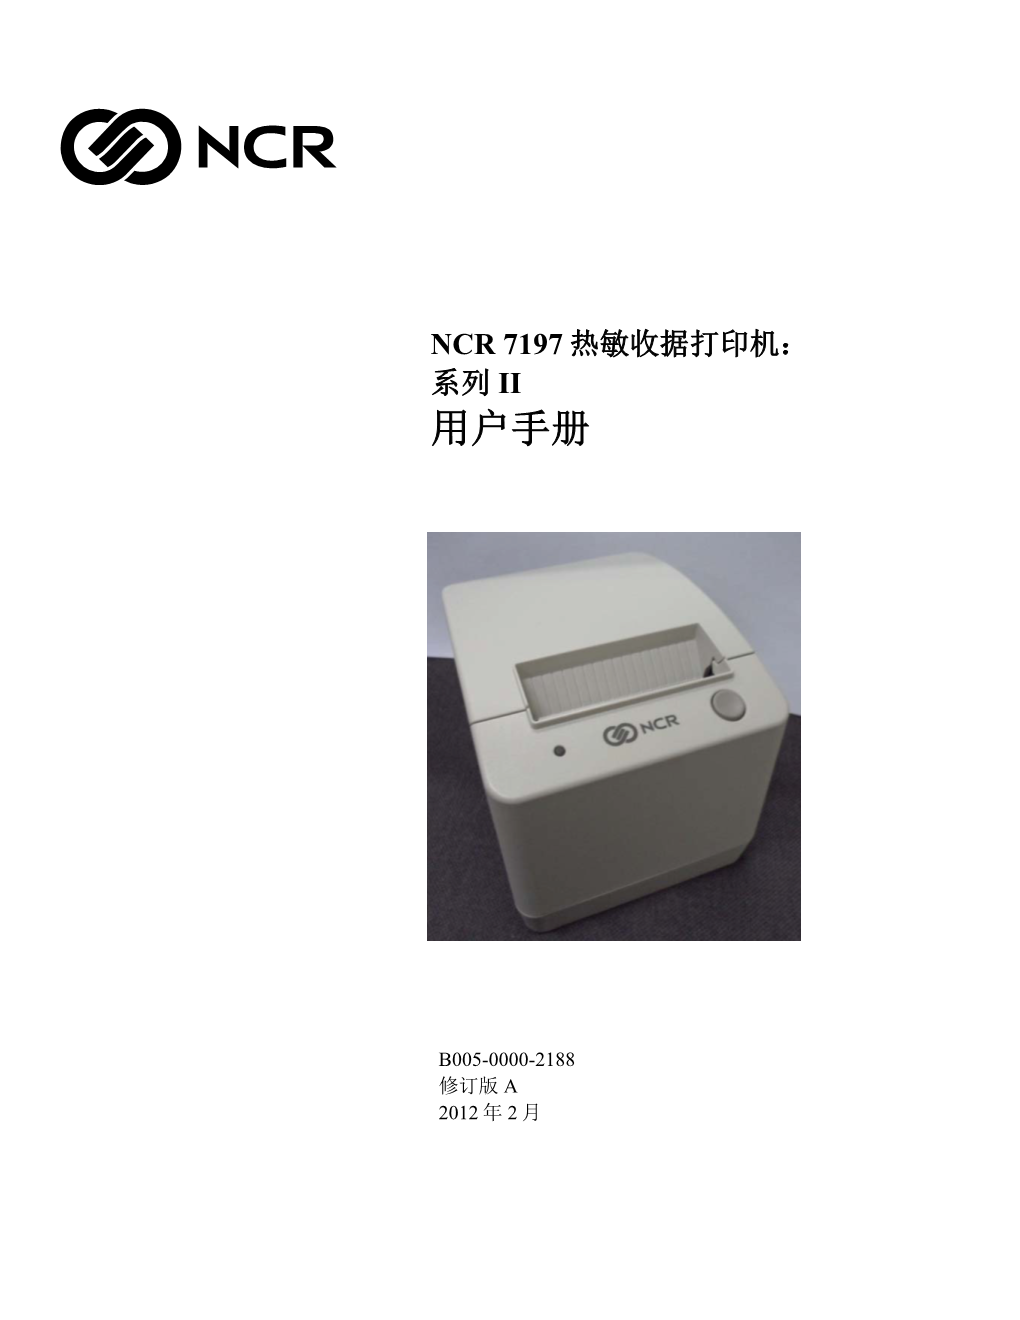 NCR 7197 Thermal Receipt